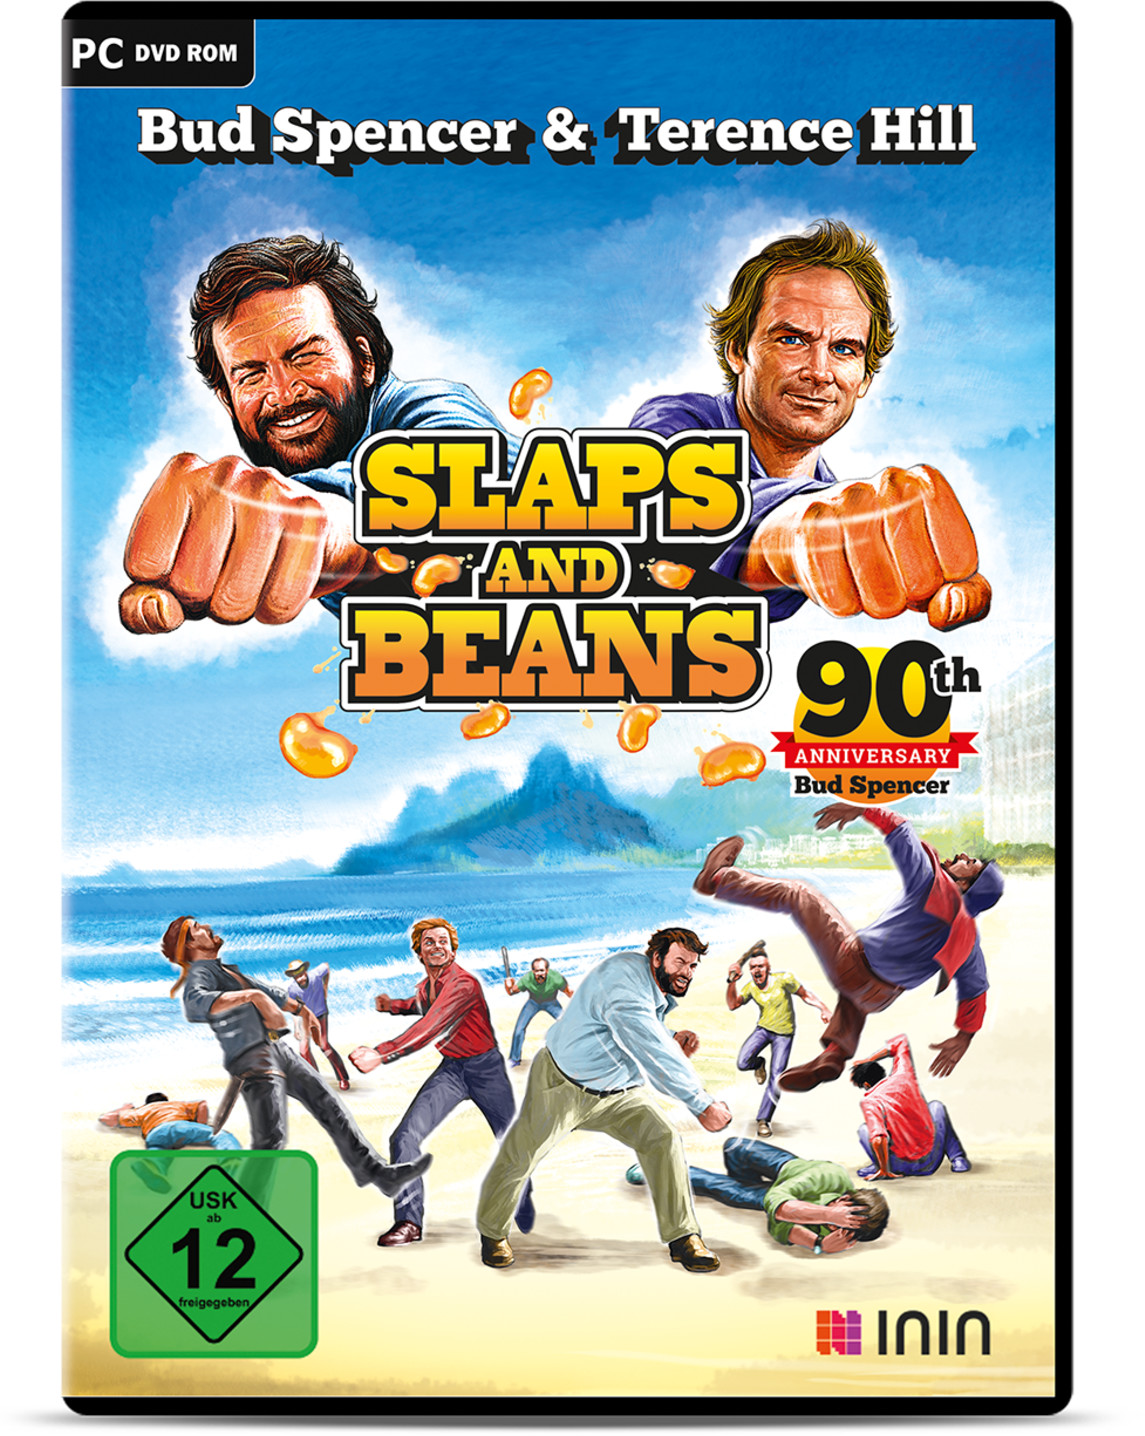 Bud Spencer & Anniversary (PC) € Slaps | Preisvergleich Edition - bei 34,99 Hill: And Terence Beans ab